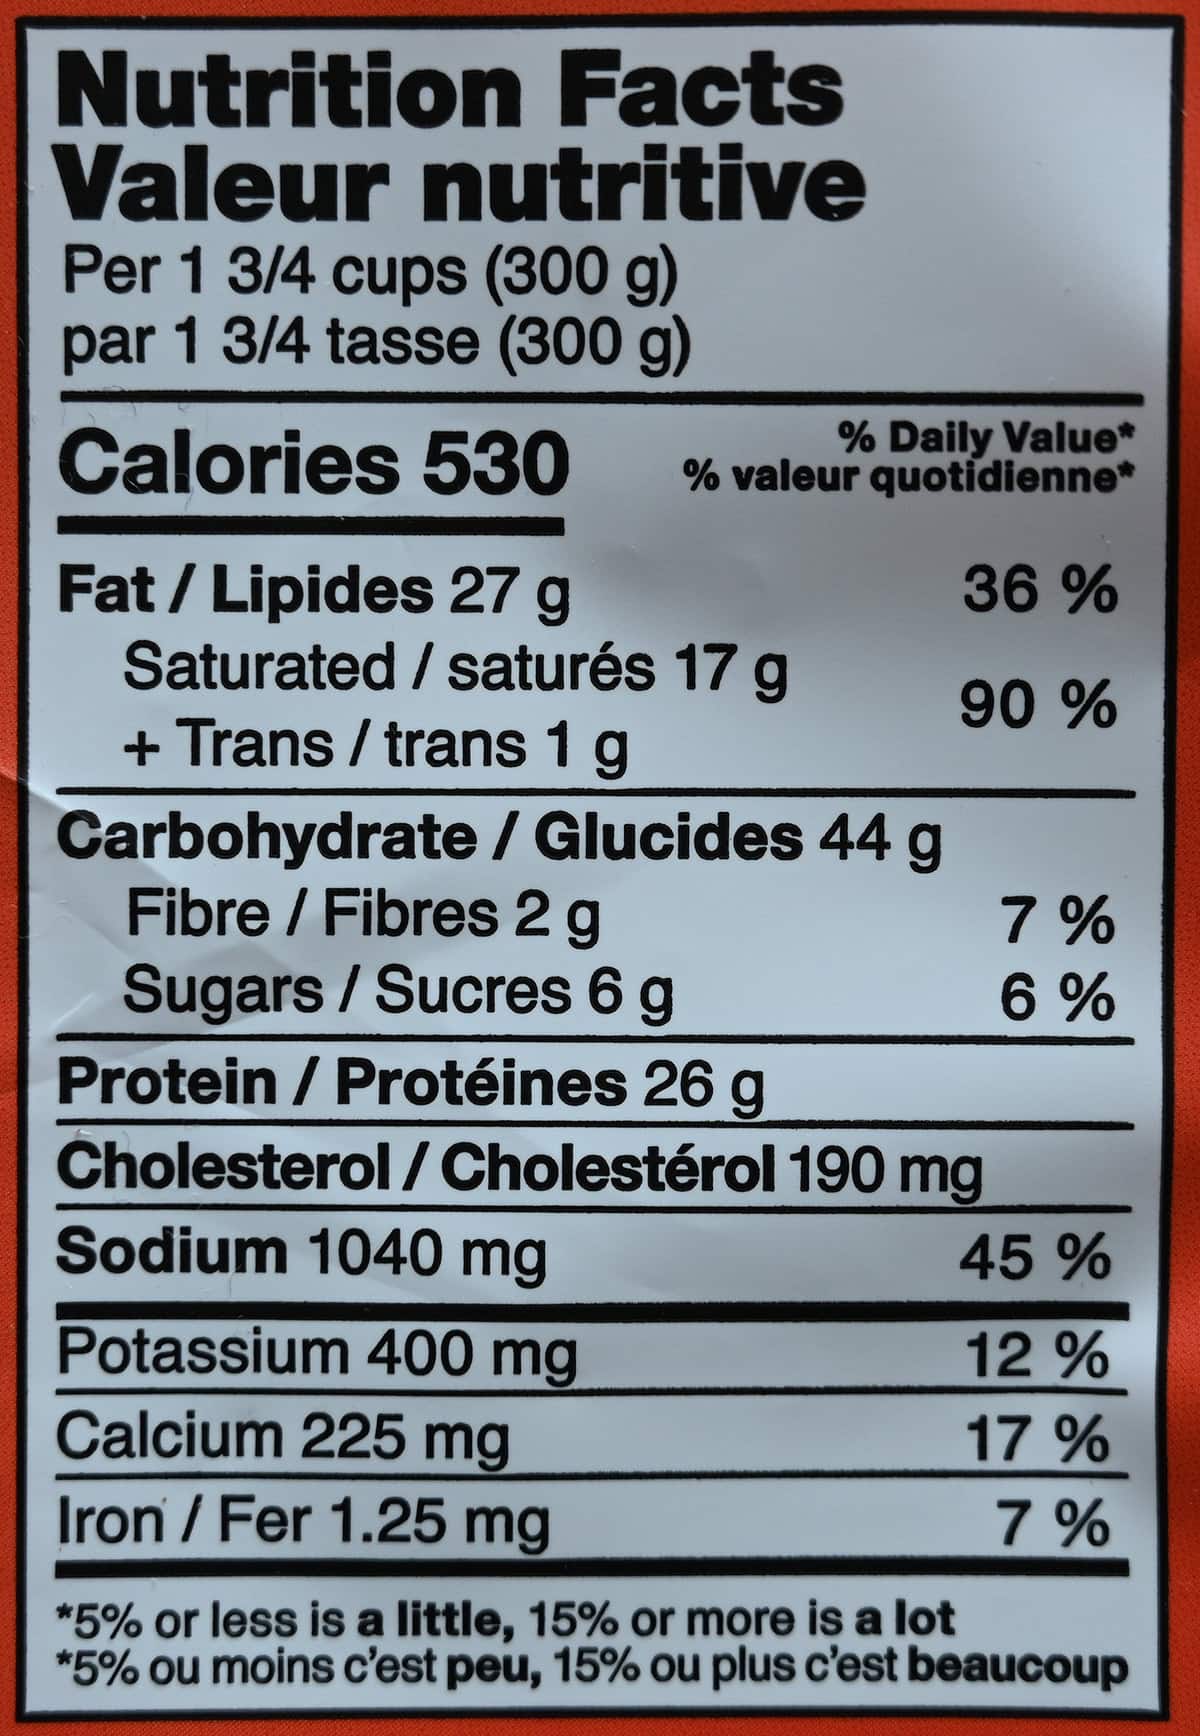 Image of the nutrition facts for the fettuccine from the back of the package.